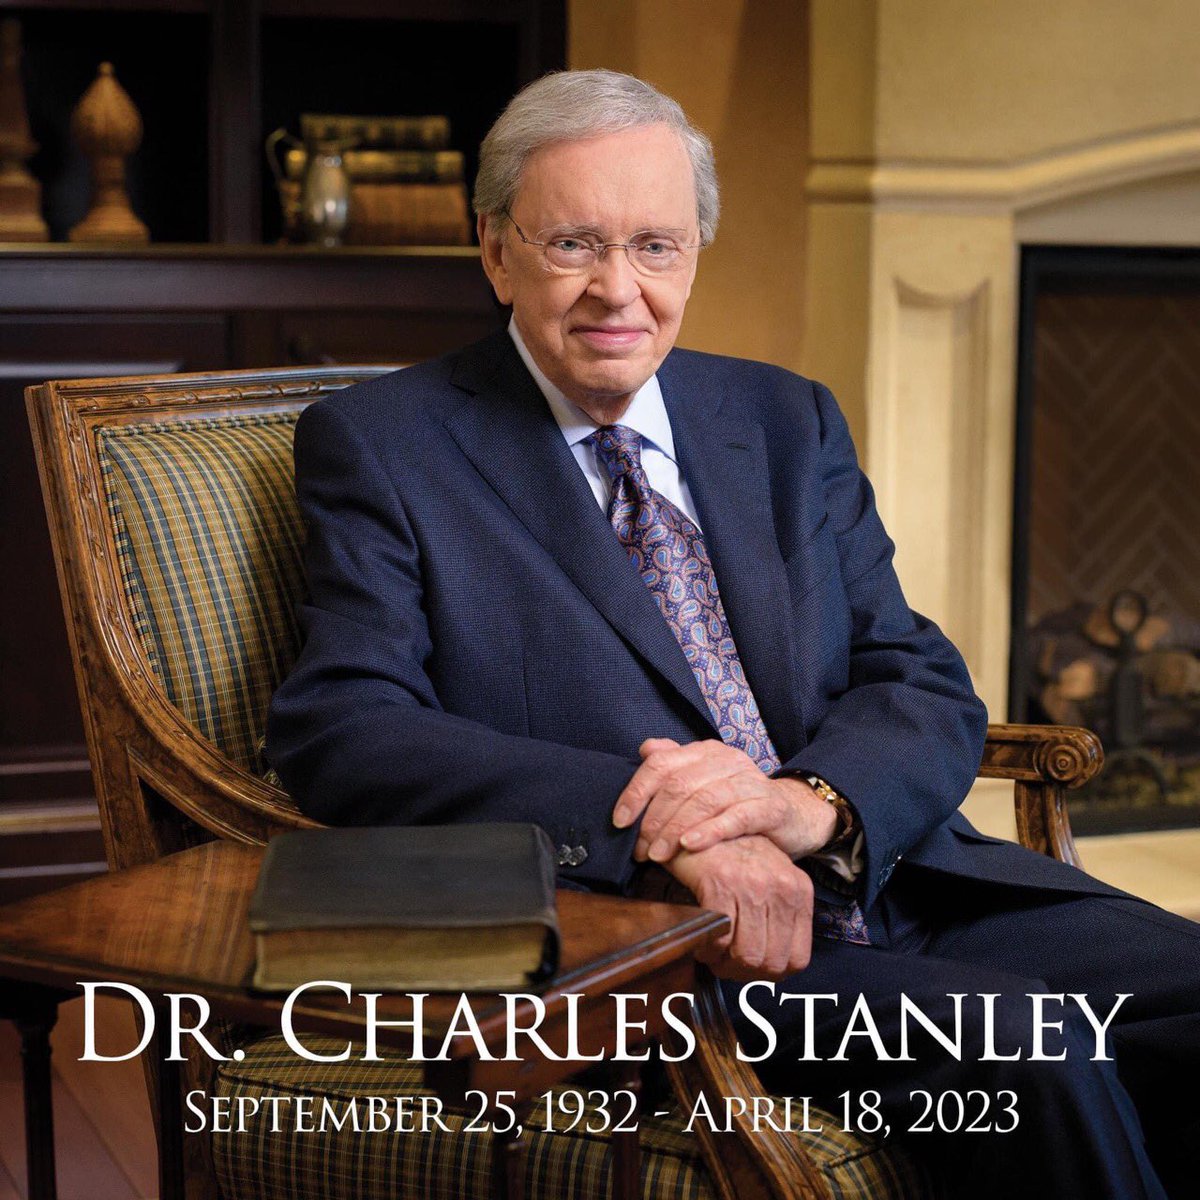 Dr. Charles Stanley died today at the age of 90. He was the long time pastor of the First Baptist Church, Atlanta. “Precious in the sight of the LORD is the death of his saints.” Psalm 116:15 He lived by this motto “Obey God and leave all the consequences to him.”